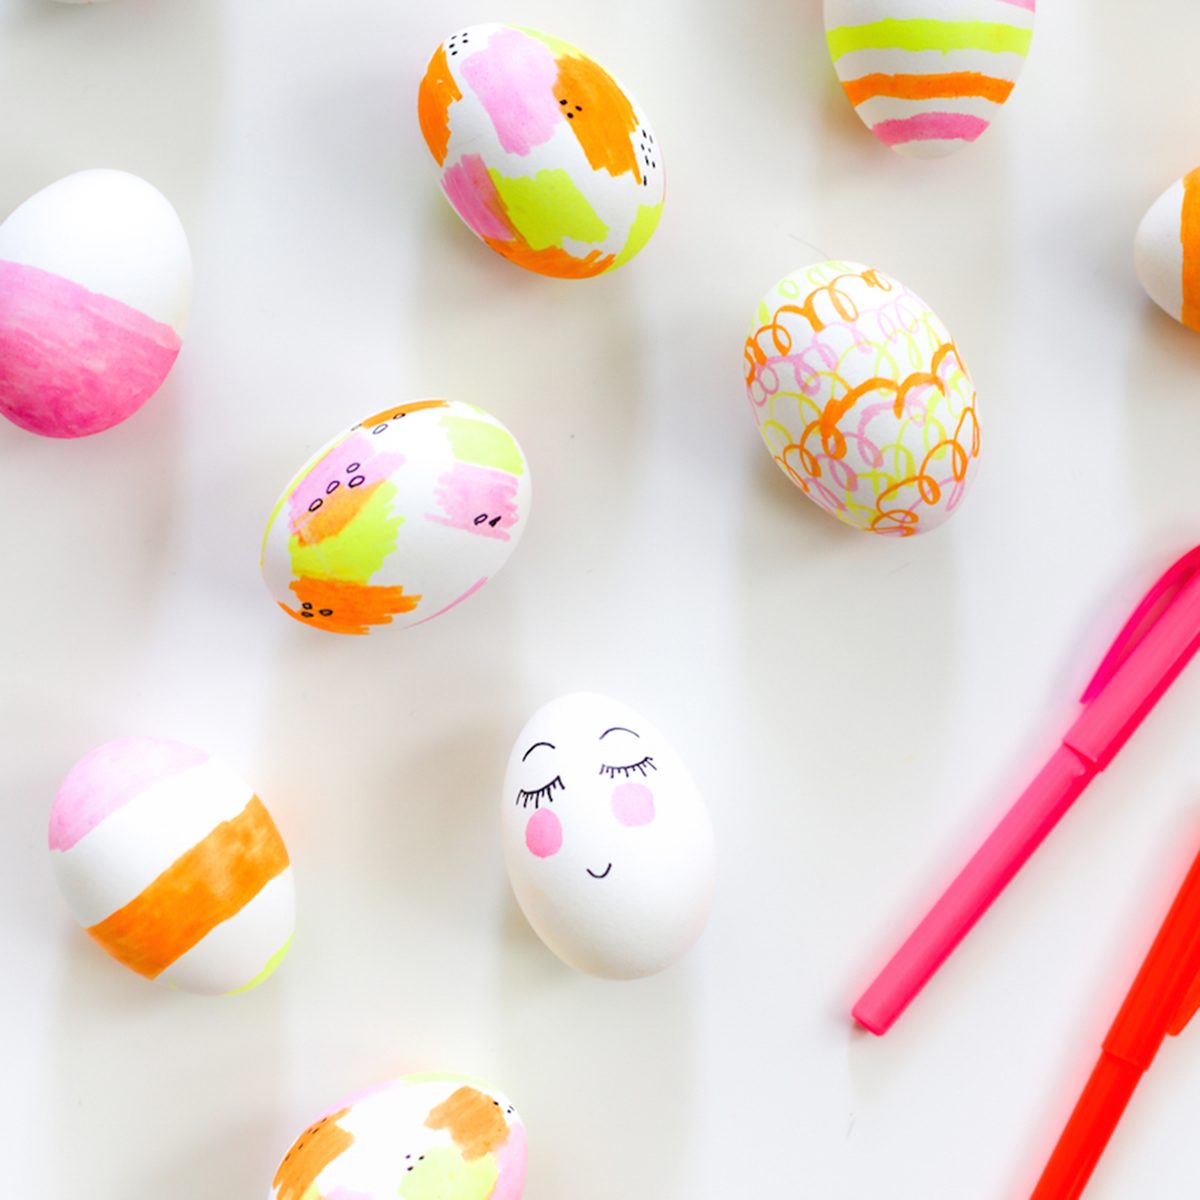 8 Ways to Decorate Eggs for Easter That You Can Still Eat